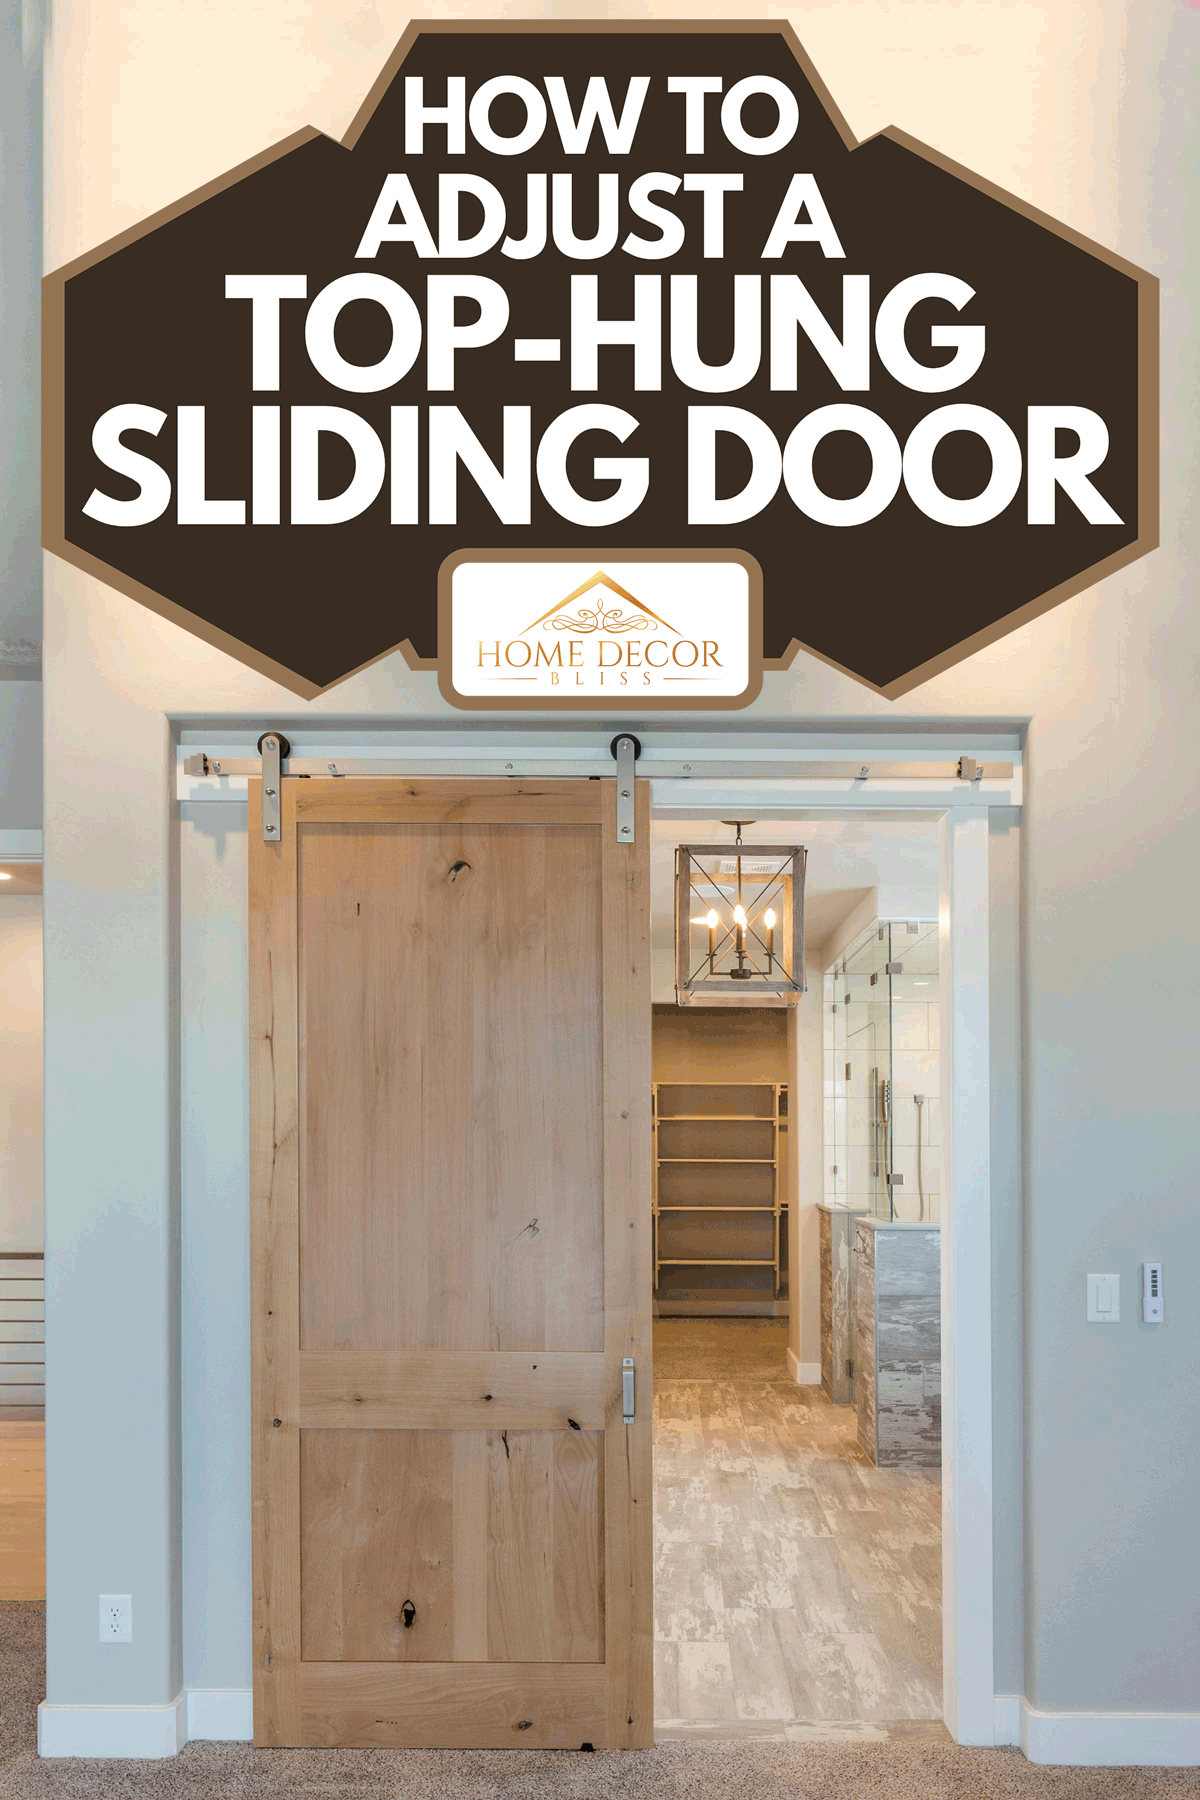 A modern rustic farm house master bedroom, How To Adjust A Top-Hung Sliding Door